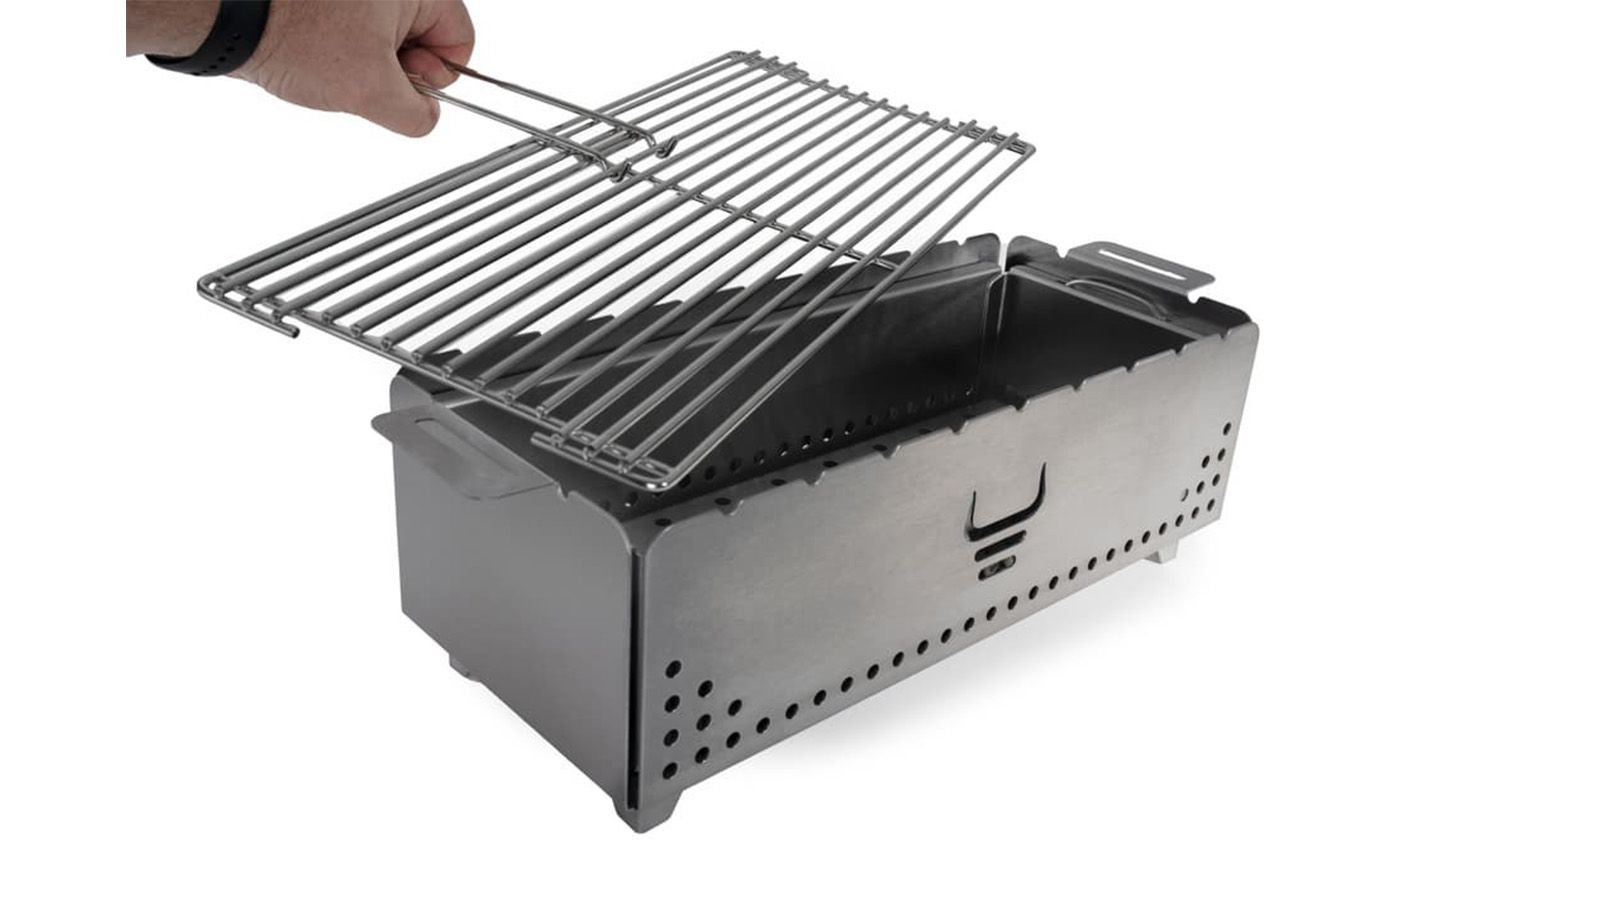 Japanese Style Grill Portable Bbq Grill Table Top Barbecue Stove